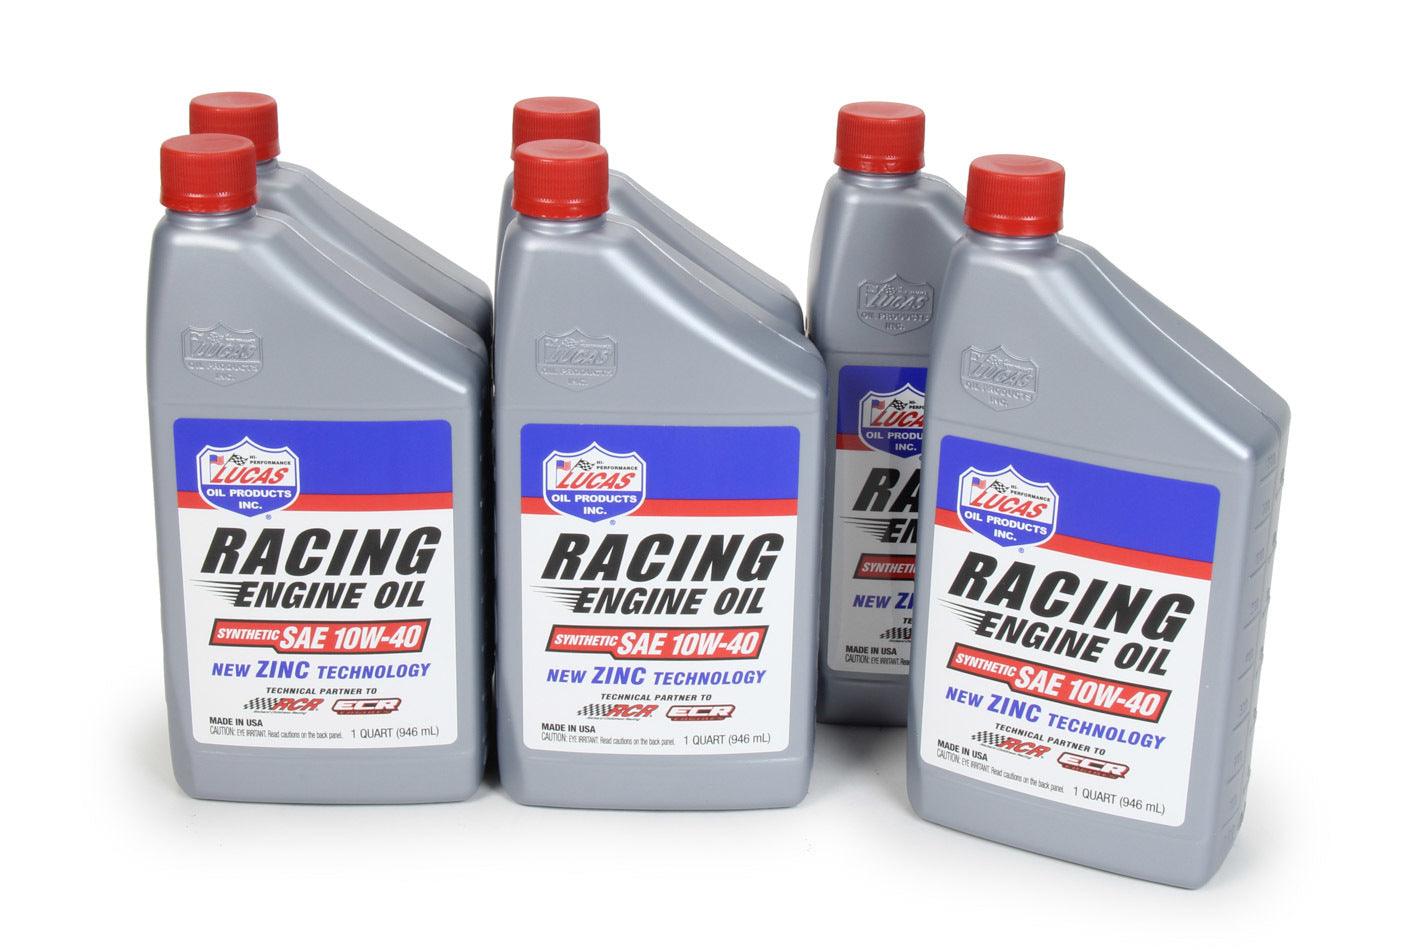 10w40 Synthetic Racing Oil Case 6 x 1 Quart - Burlile Performance Products